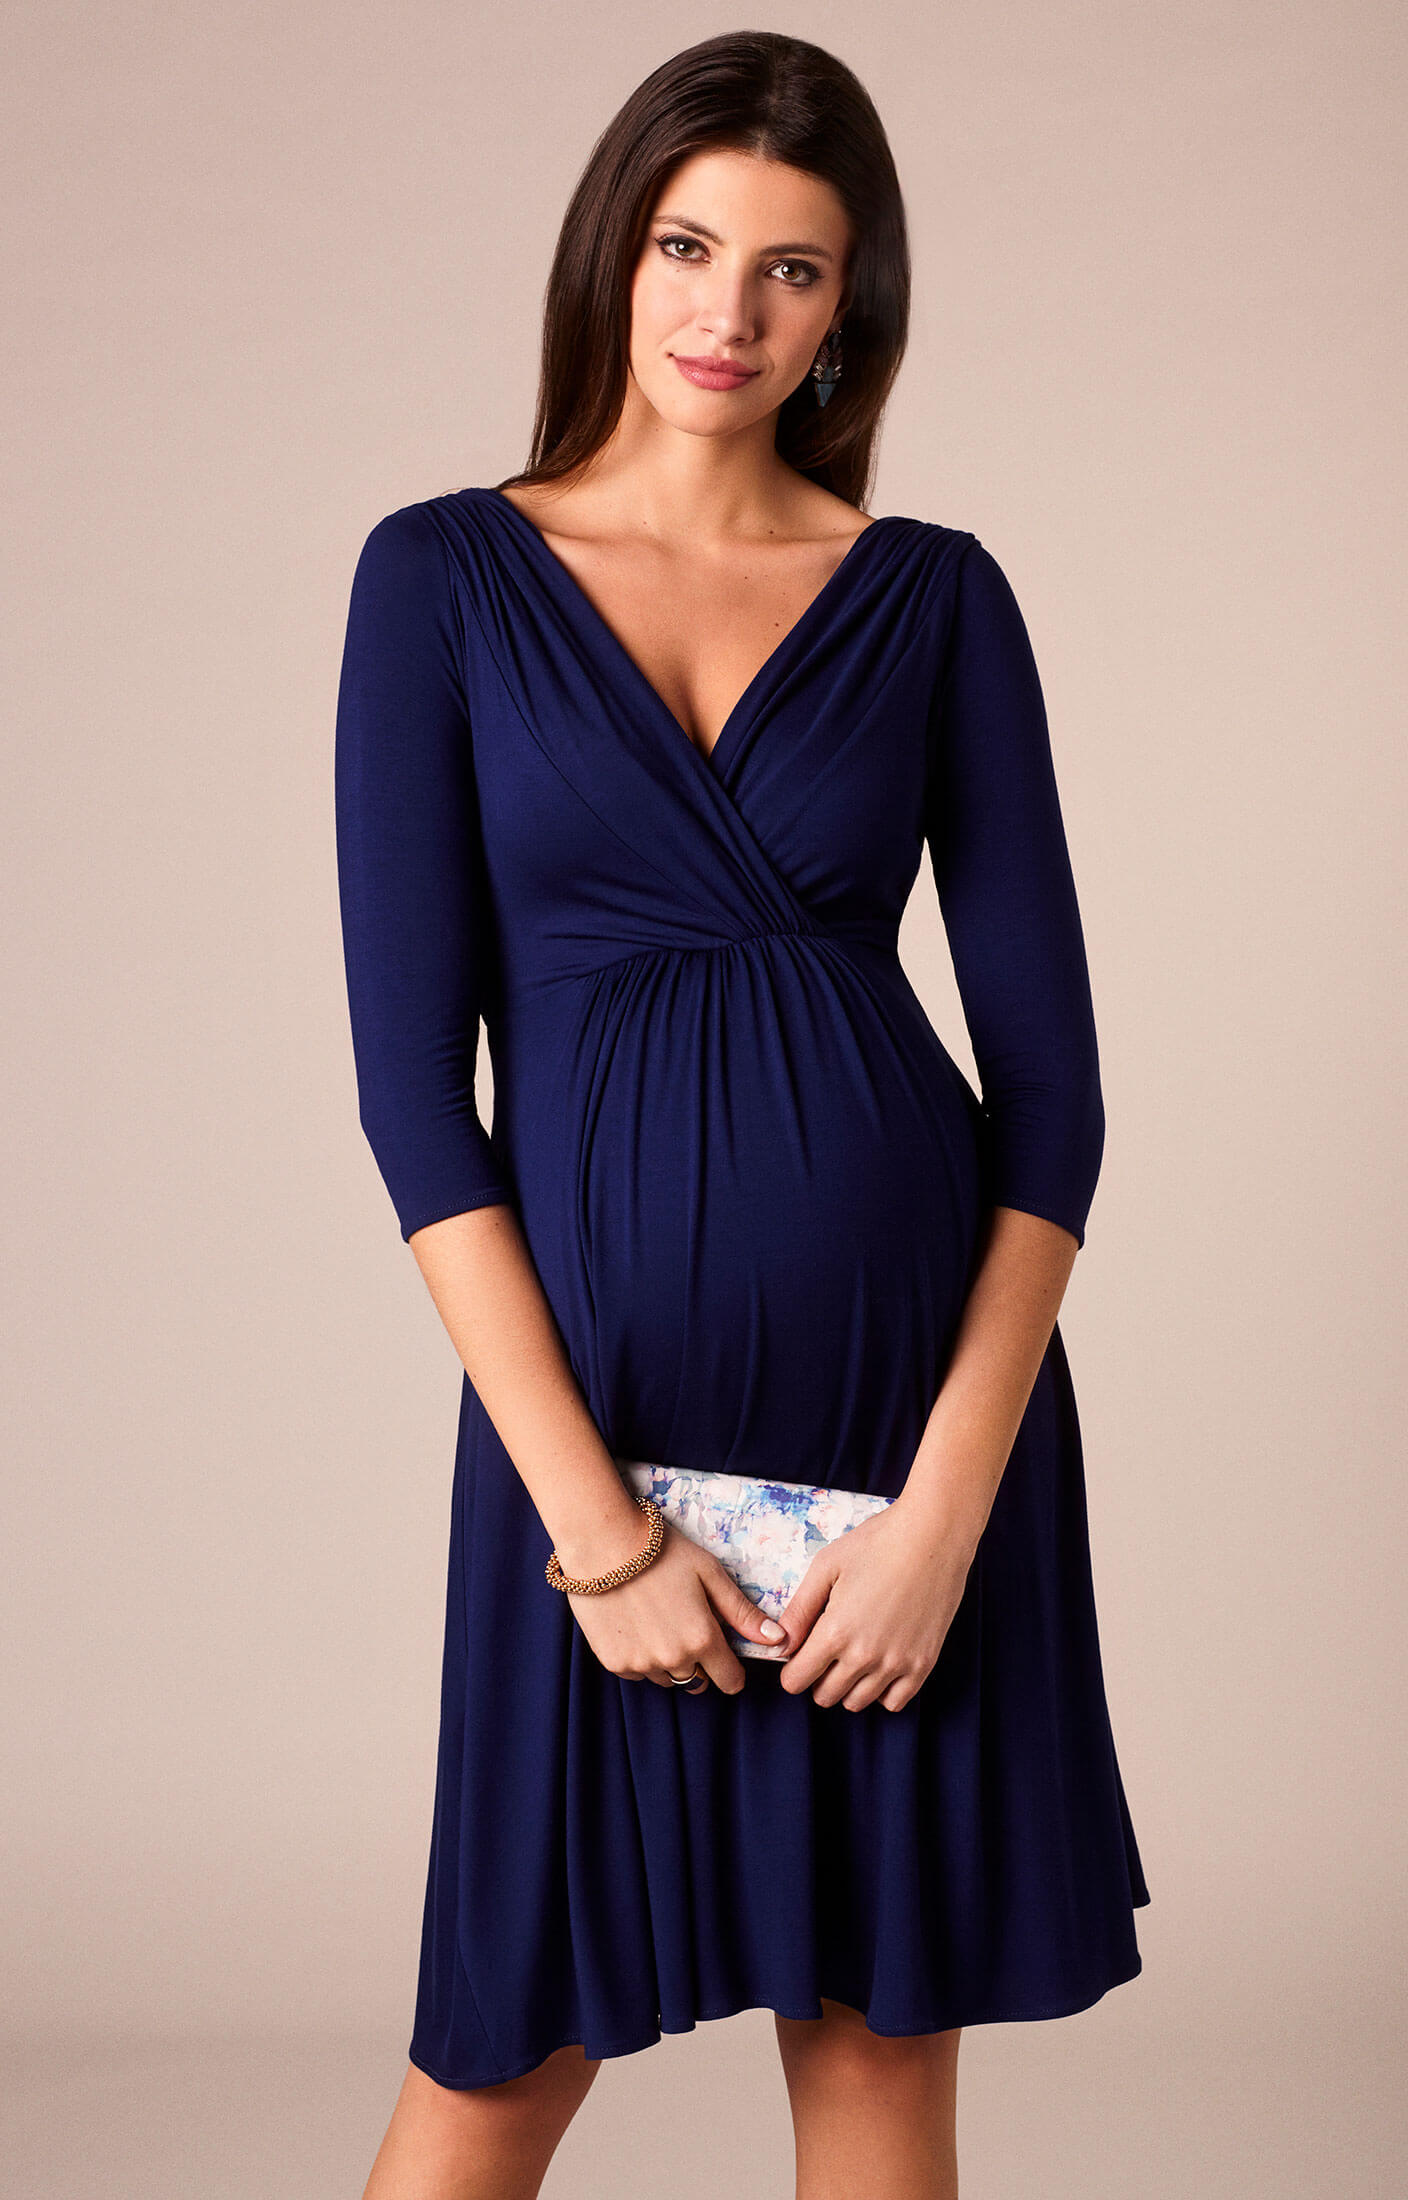 Willow Maternity Dress Eclipse Blue Maternity Wedding Dresses Evening Wear And Party Clothes